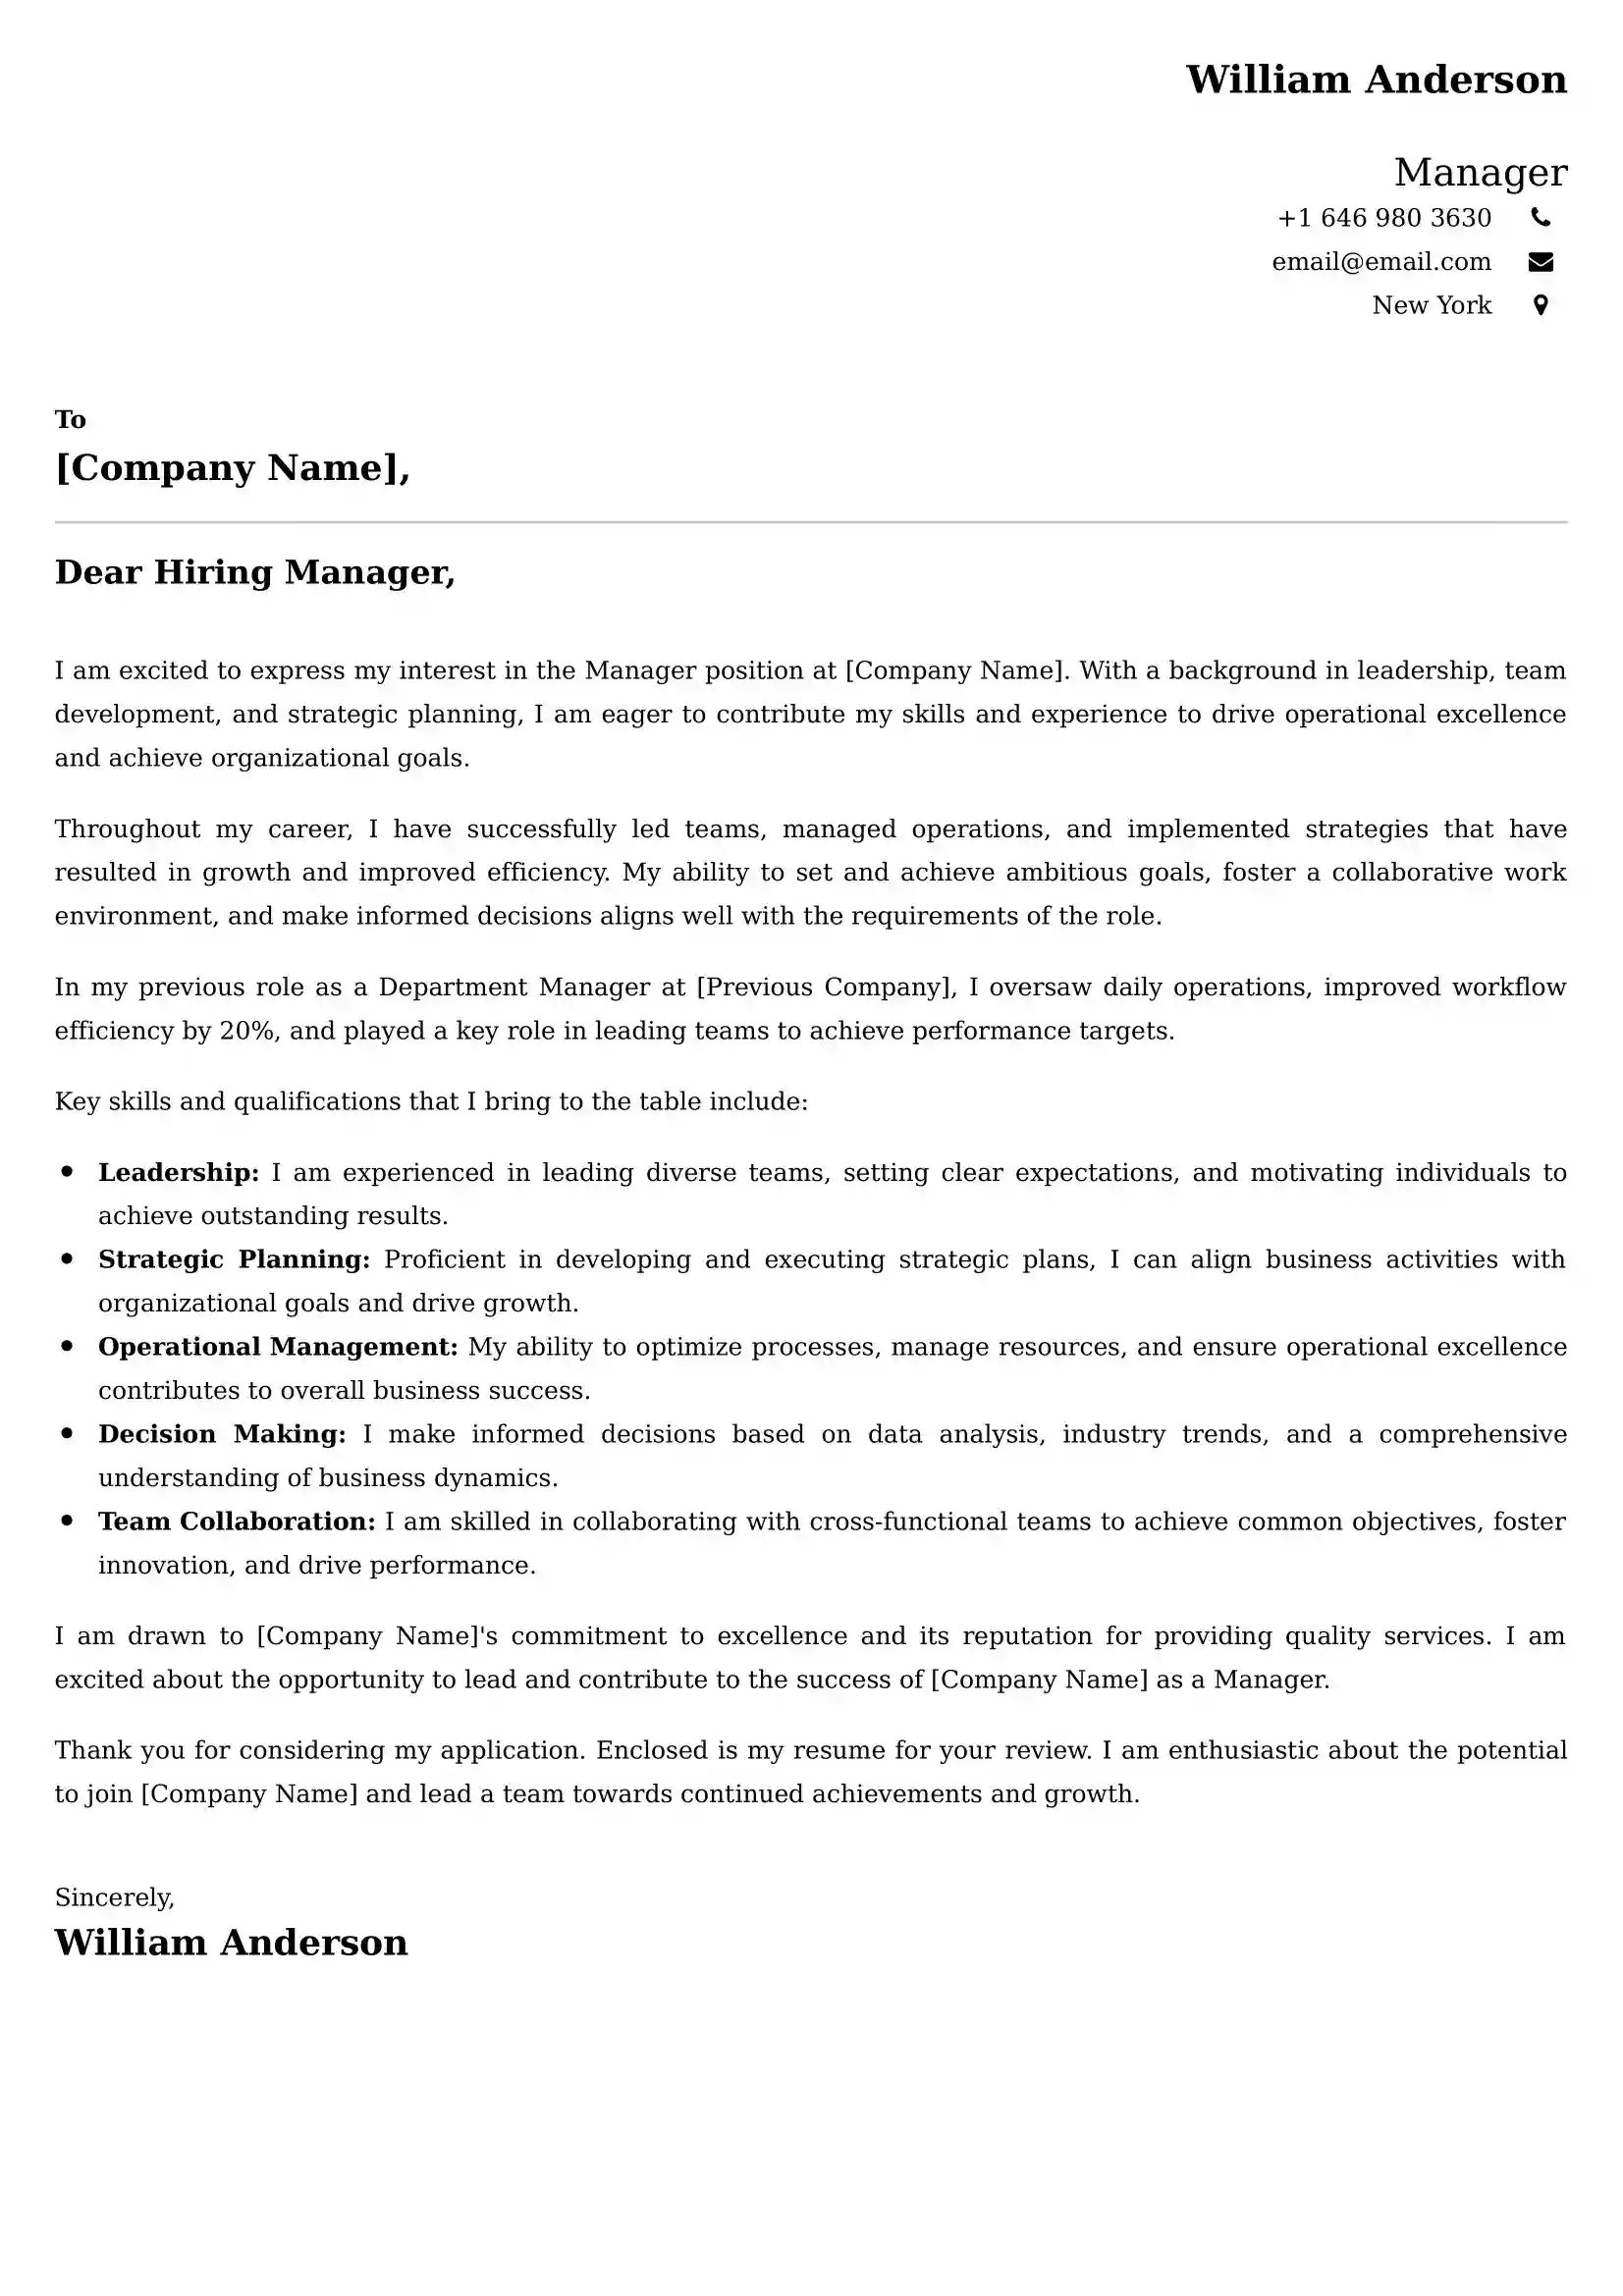 Manager Cover Letter Samples Malaysia